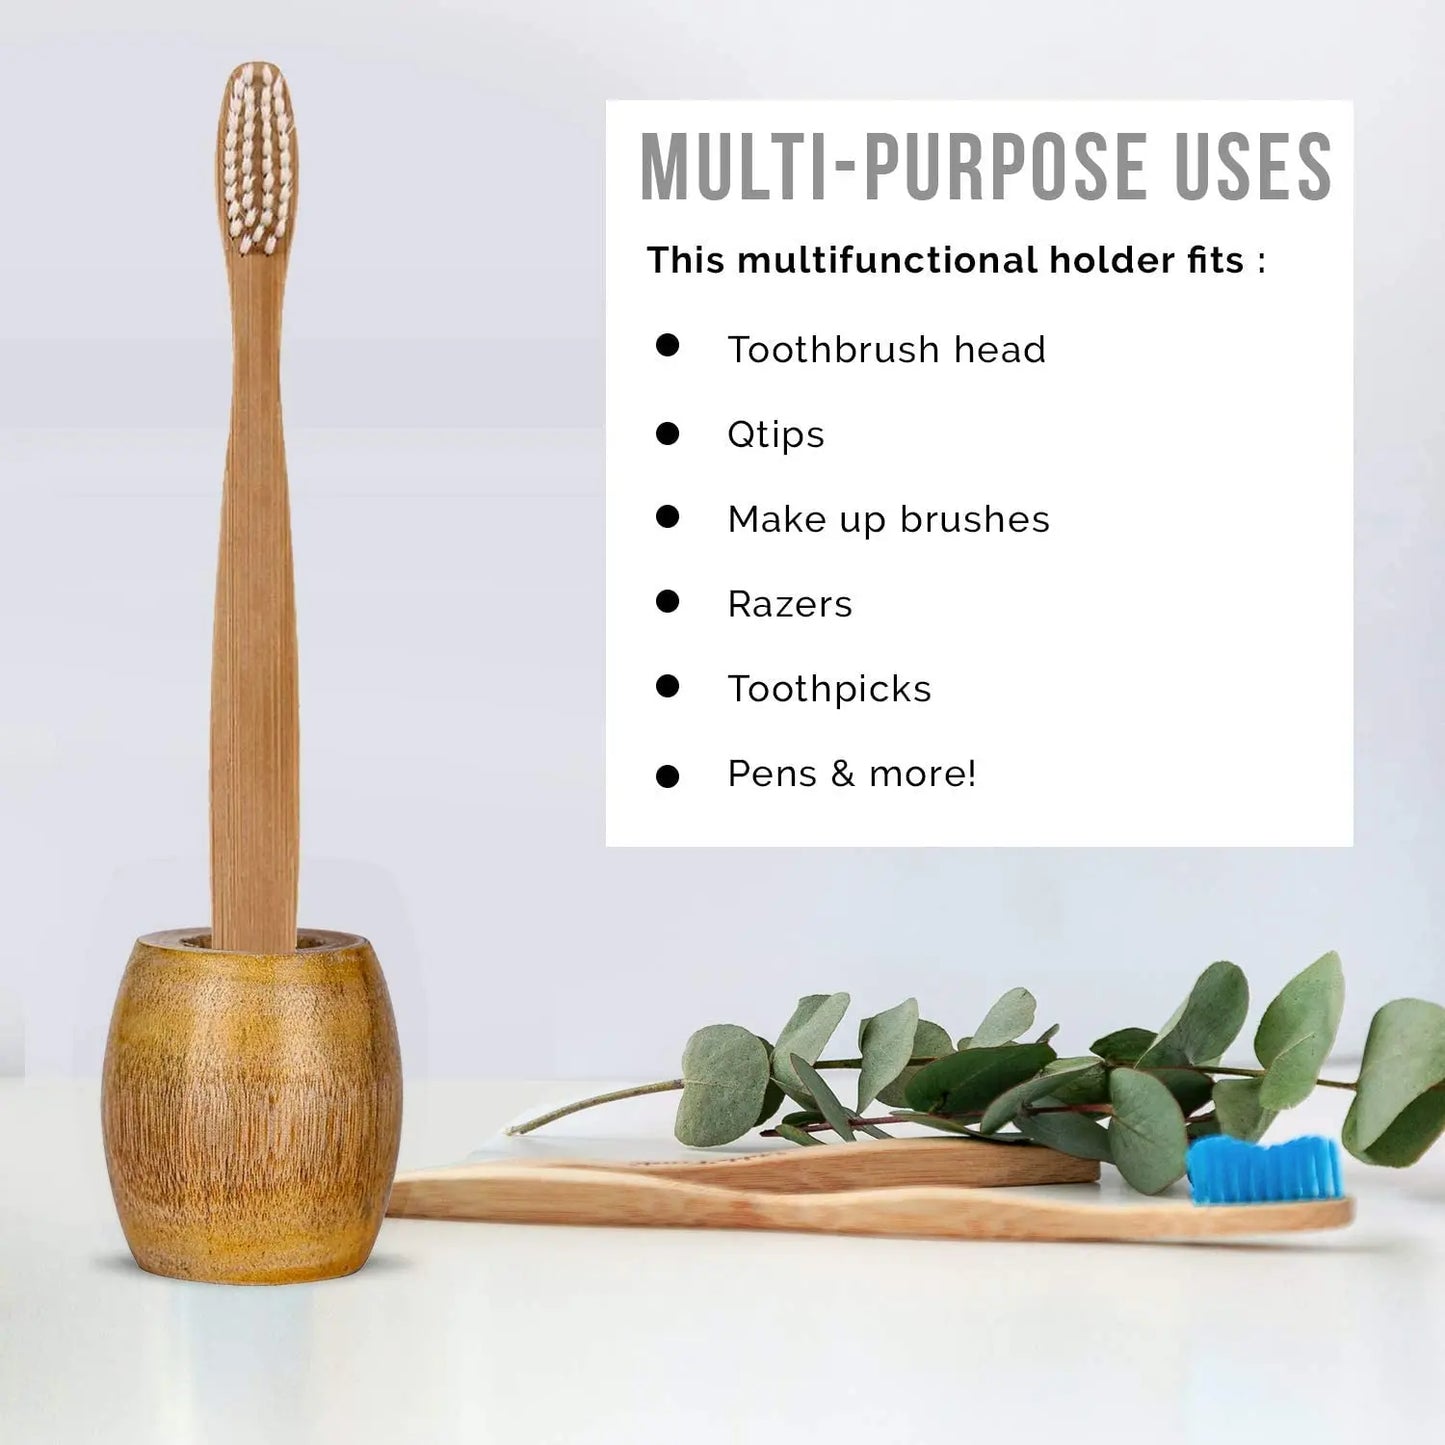 1PCS Eco Friendly Bamboo Toothbrush Holder Wooden Toothbrushes Bathroom Stands Natural Vegan Zero Waste Accessories Tools - TotallyVeG